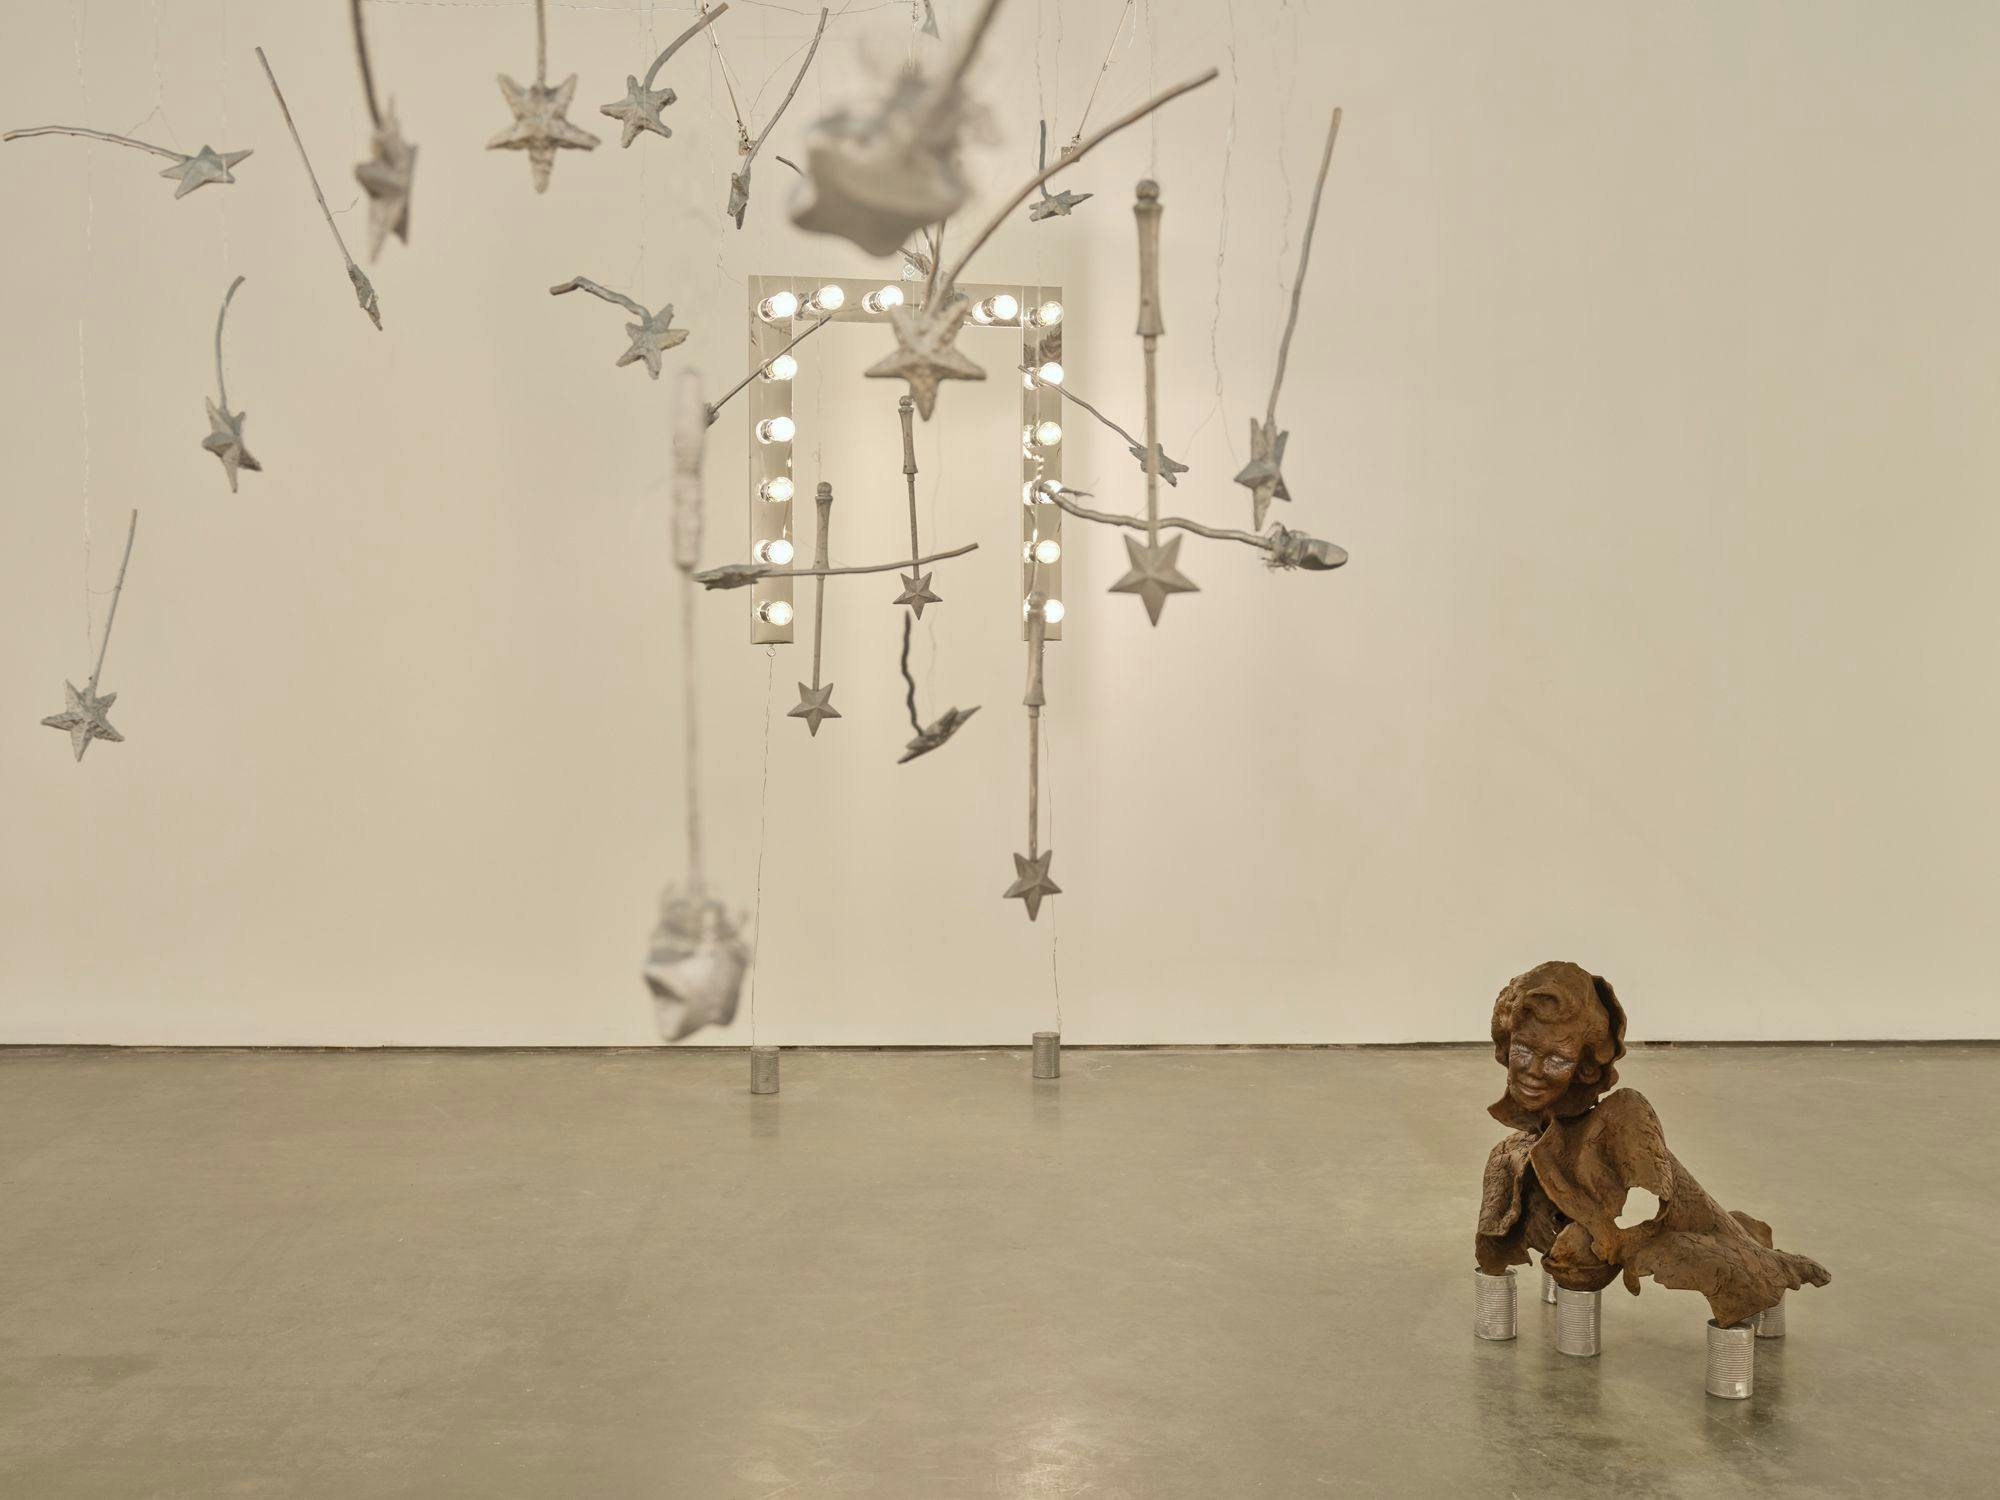 A wide view of several sculptures hanging from wire: magic wands, vanity lights and silver baguettes. A bronze sulpture of a partial human figure sits among aluminum cans and painted baguettes scattered across the floor.